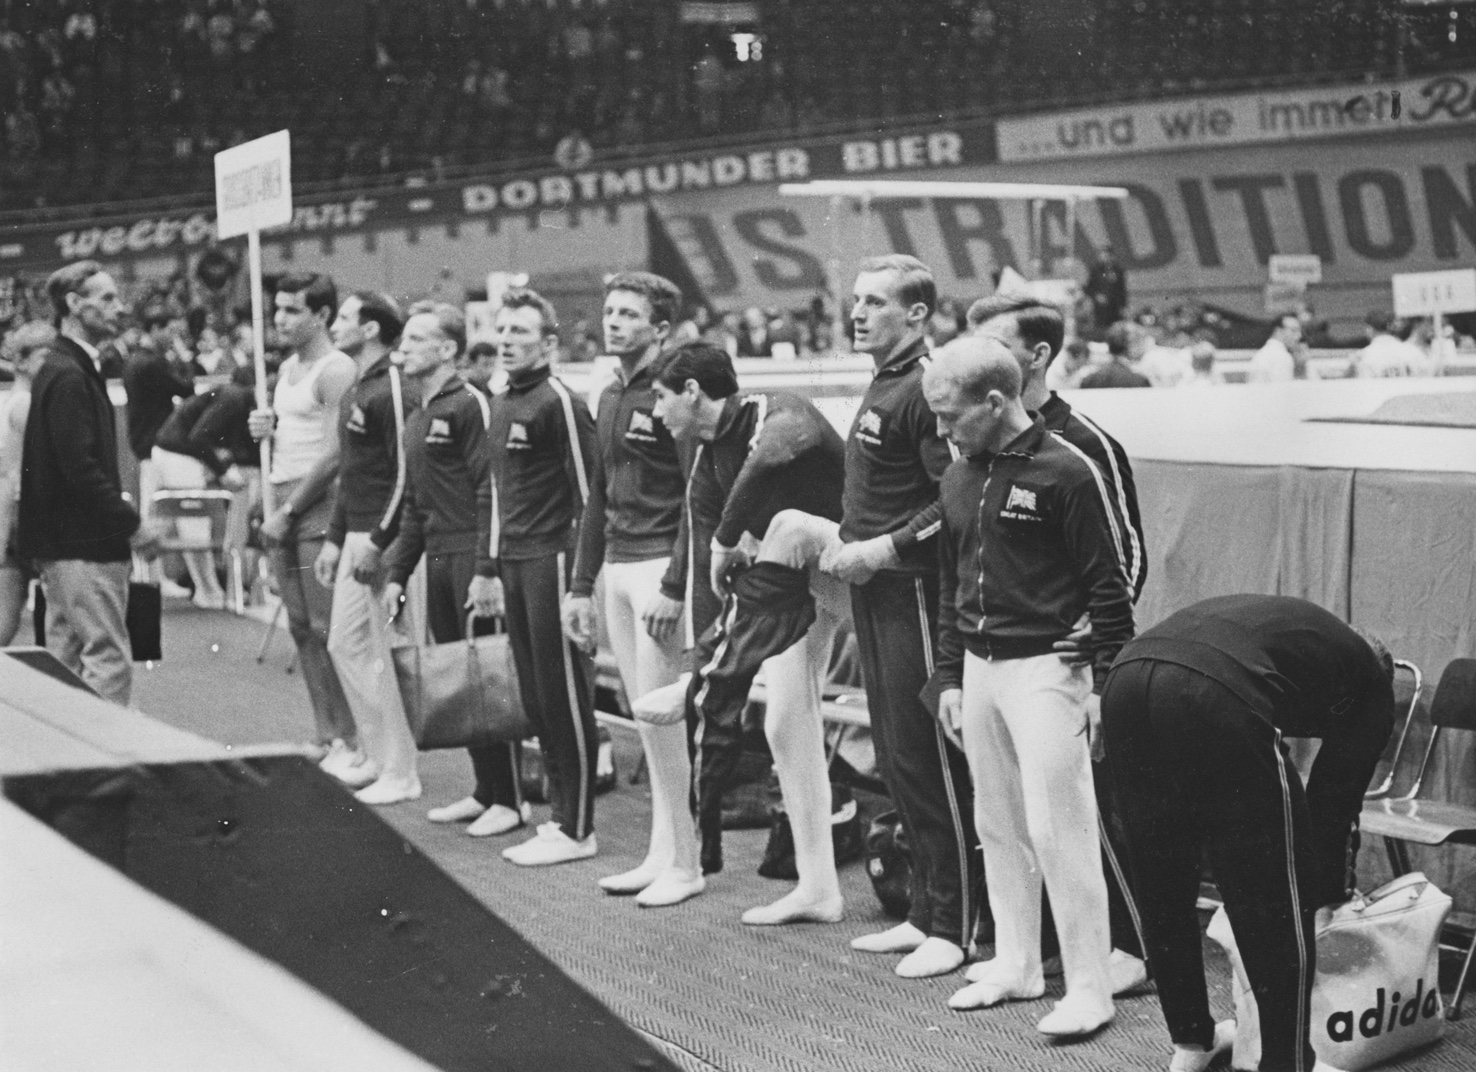 Mike Booth with the GB Men's Team at the Dortmund World Championships in 1966 - Photo Alan Burrows